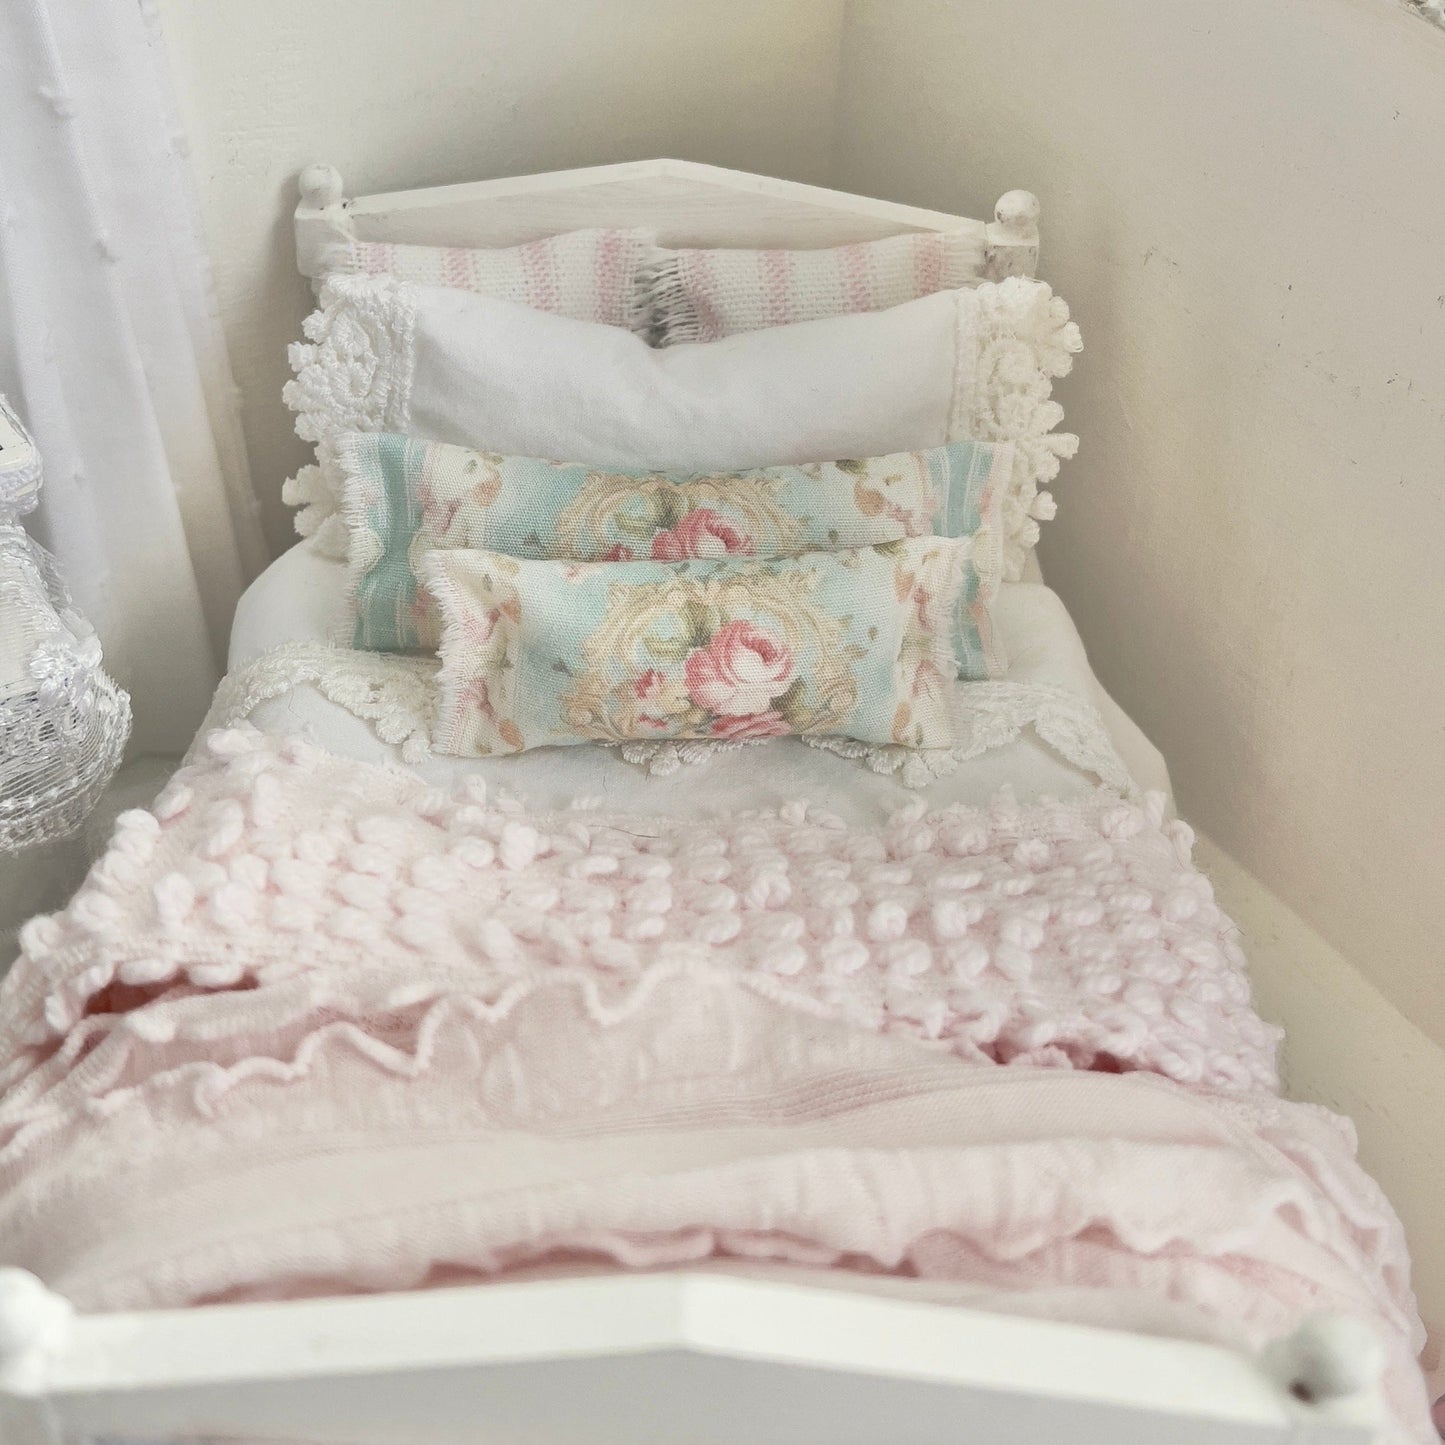 Chantallena Doll House (Copy) Dressed Bed | Sold White Cotton with Grand Pink Roses, Lace Accents, Ruffled Knit Throw